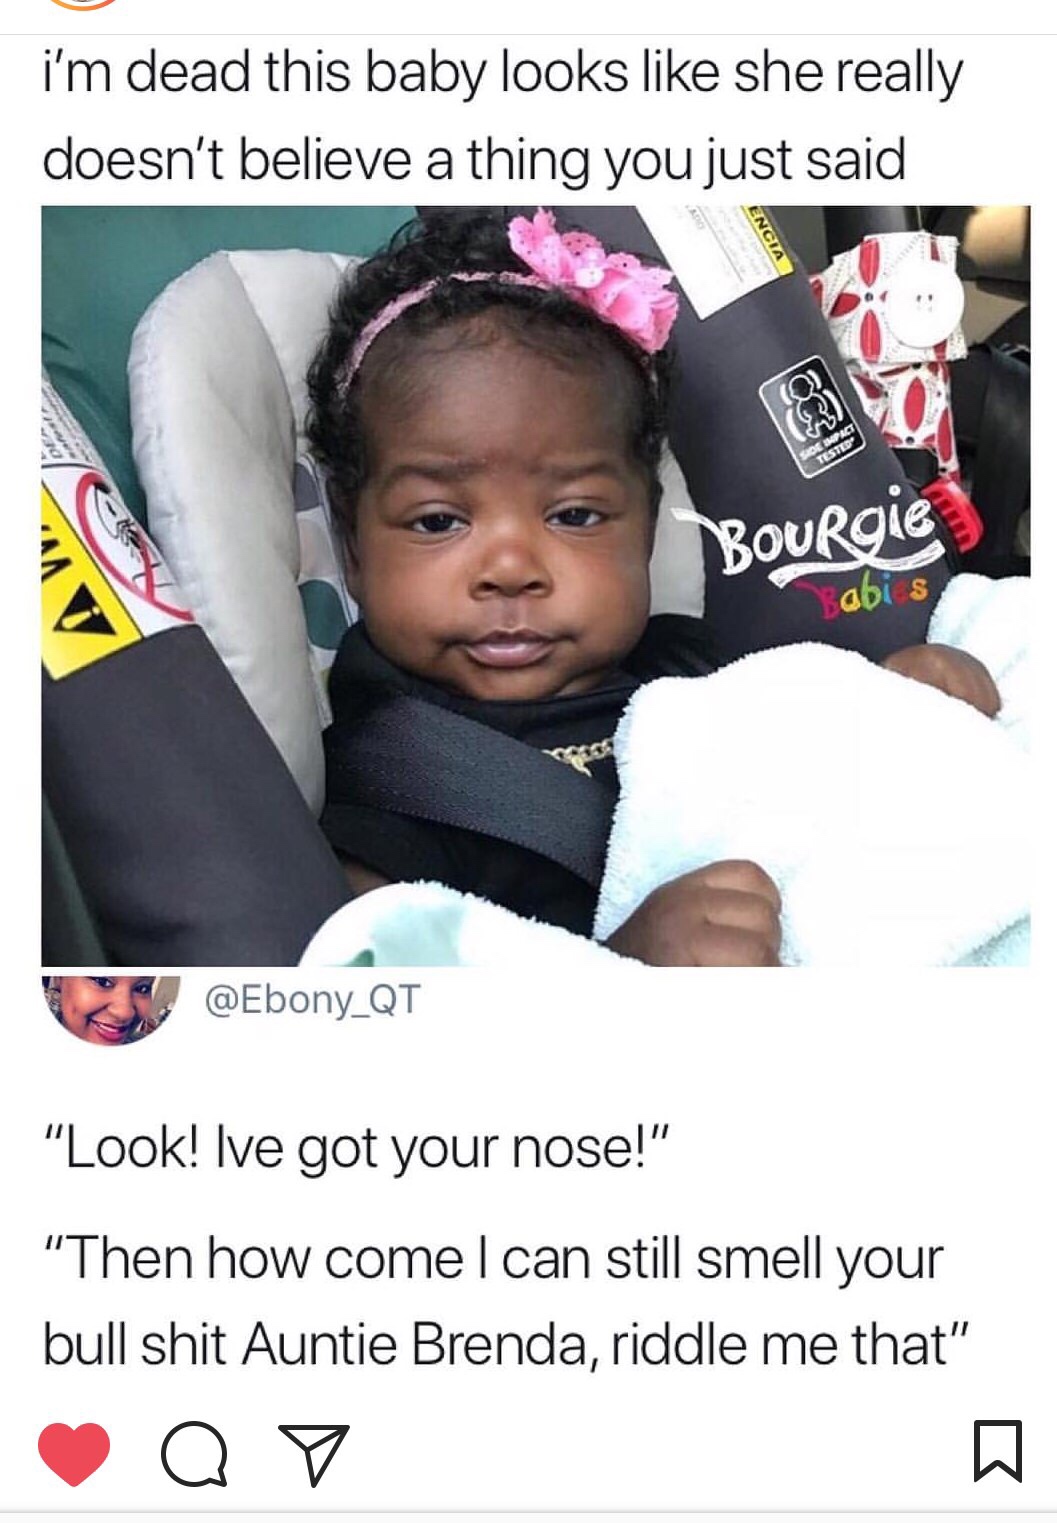 got your nose meme - i'm dead this baby looks she really doesn't believe a thing you just said Ncia De Impact Tested Bourgie abis "Look! Ive got your nose!" "Then how comel can still smell your bull shit Auntie Brenda, riddle me that" Q V